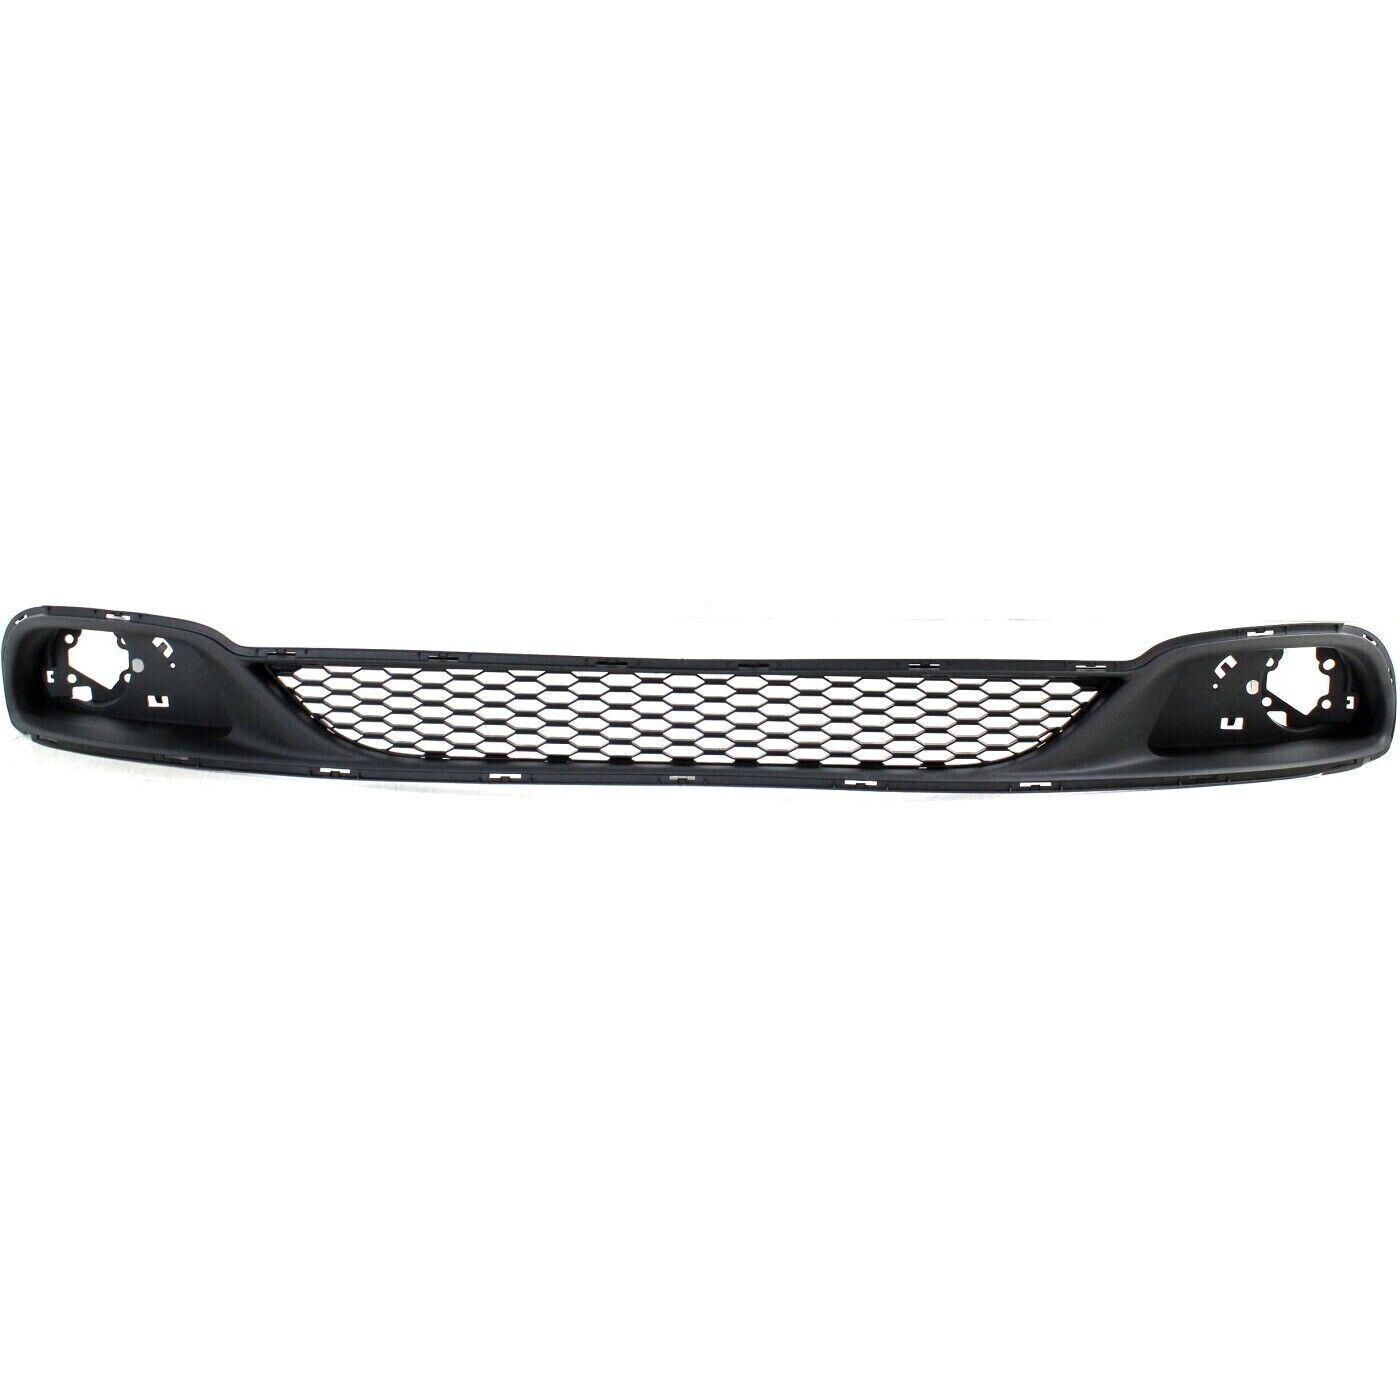 NEW Front Lower Bumper Grille For 2011-2020 Dodge Grand Caravan SHIPS TODAY